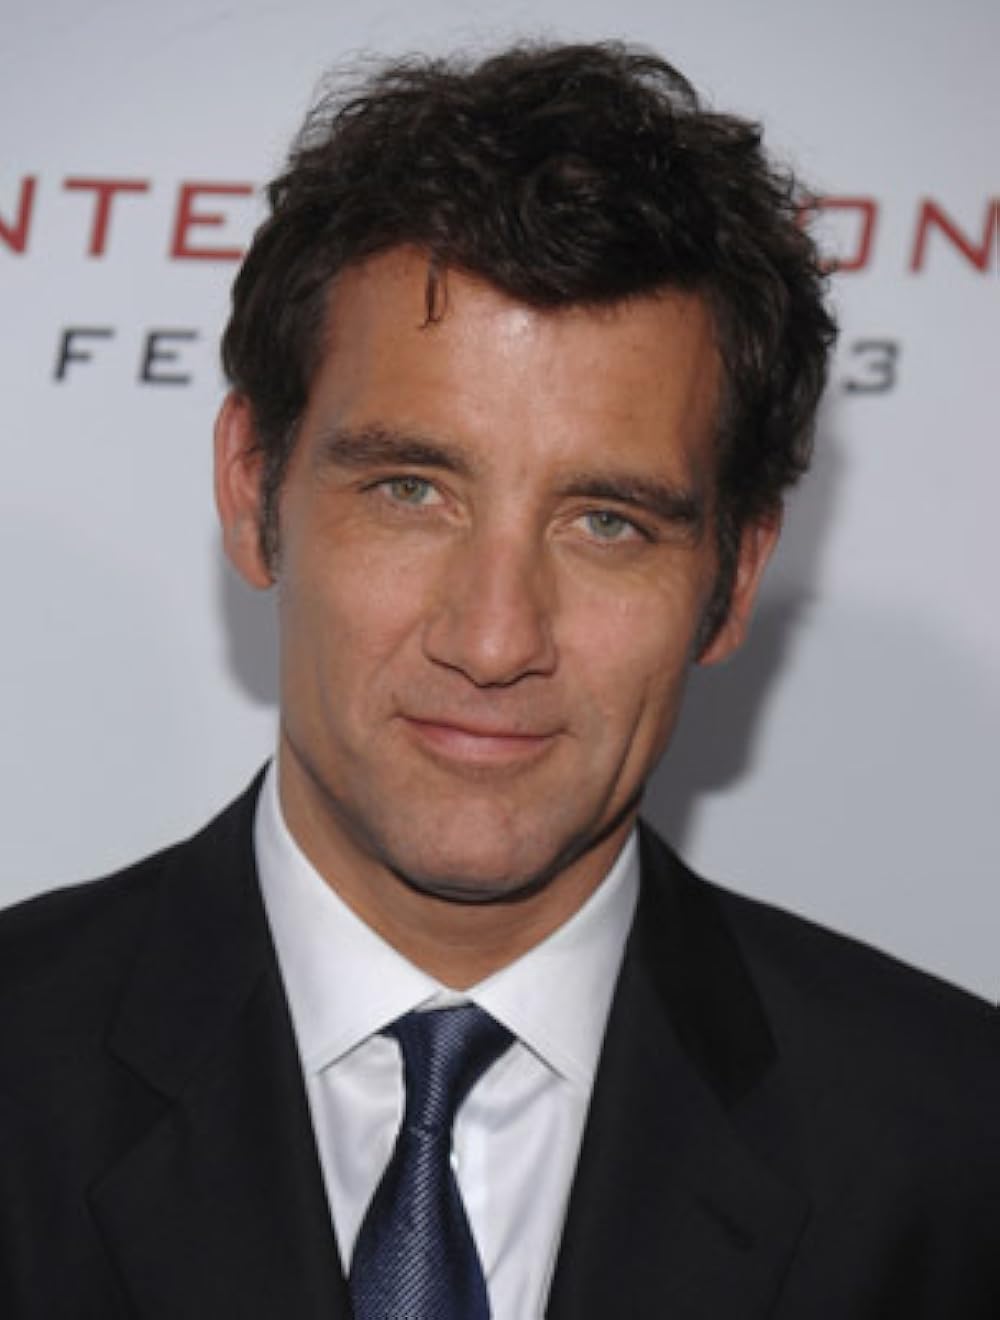 taille-clive-owen-Image